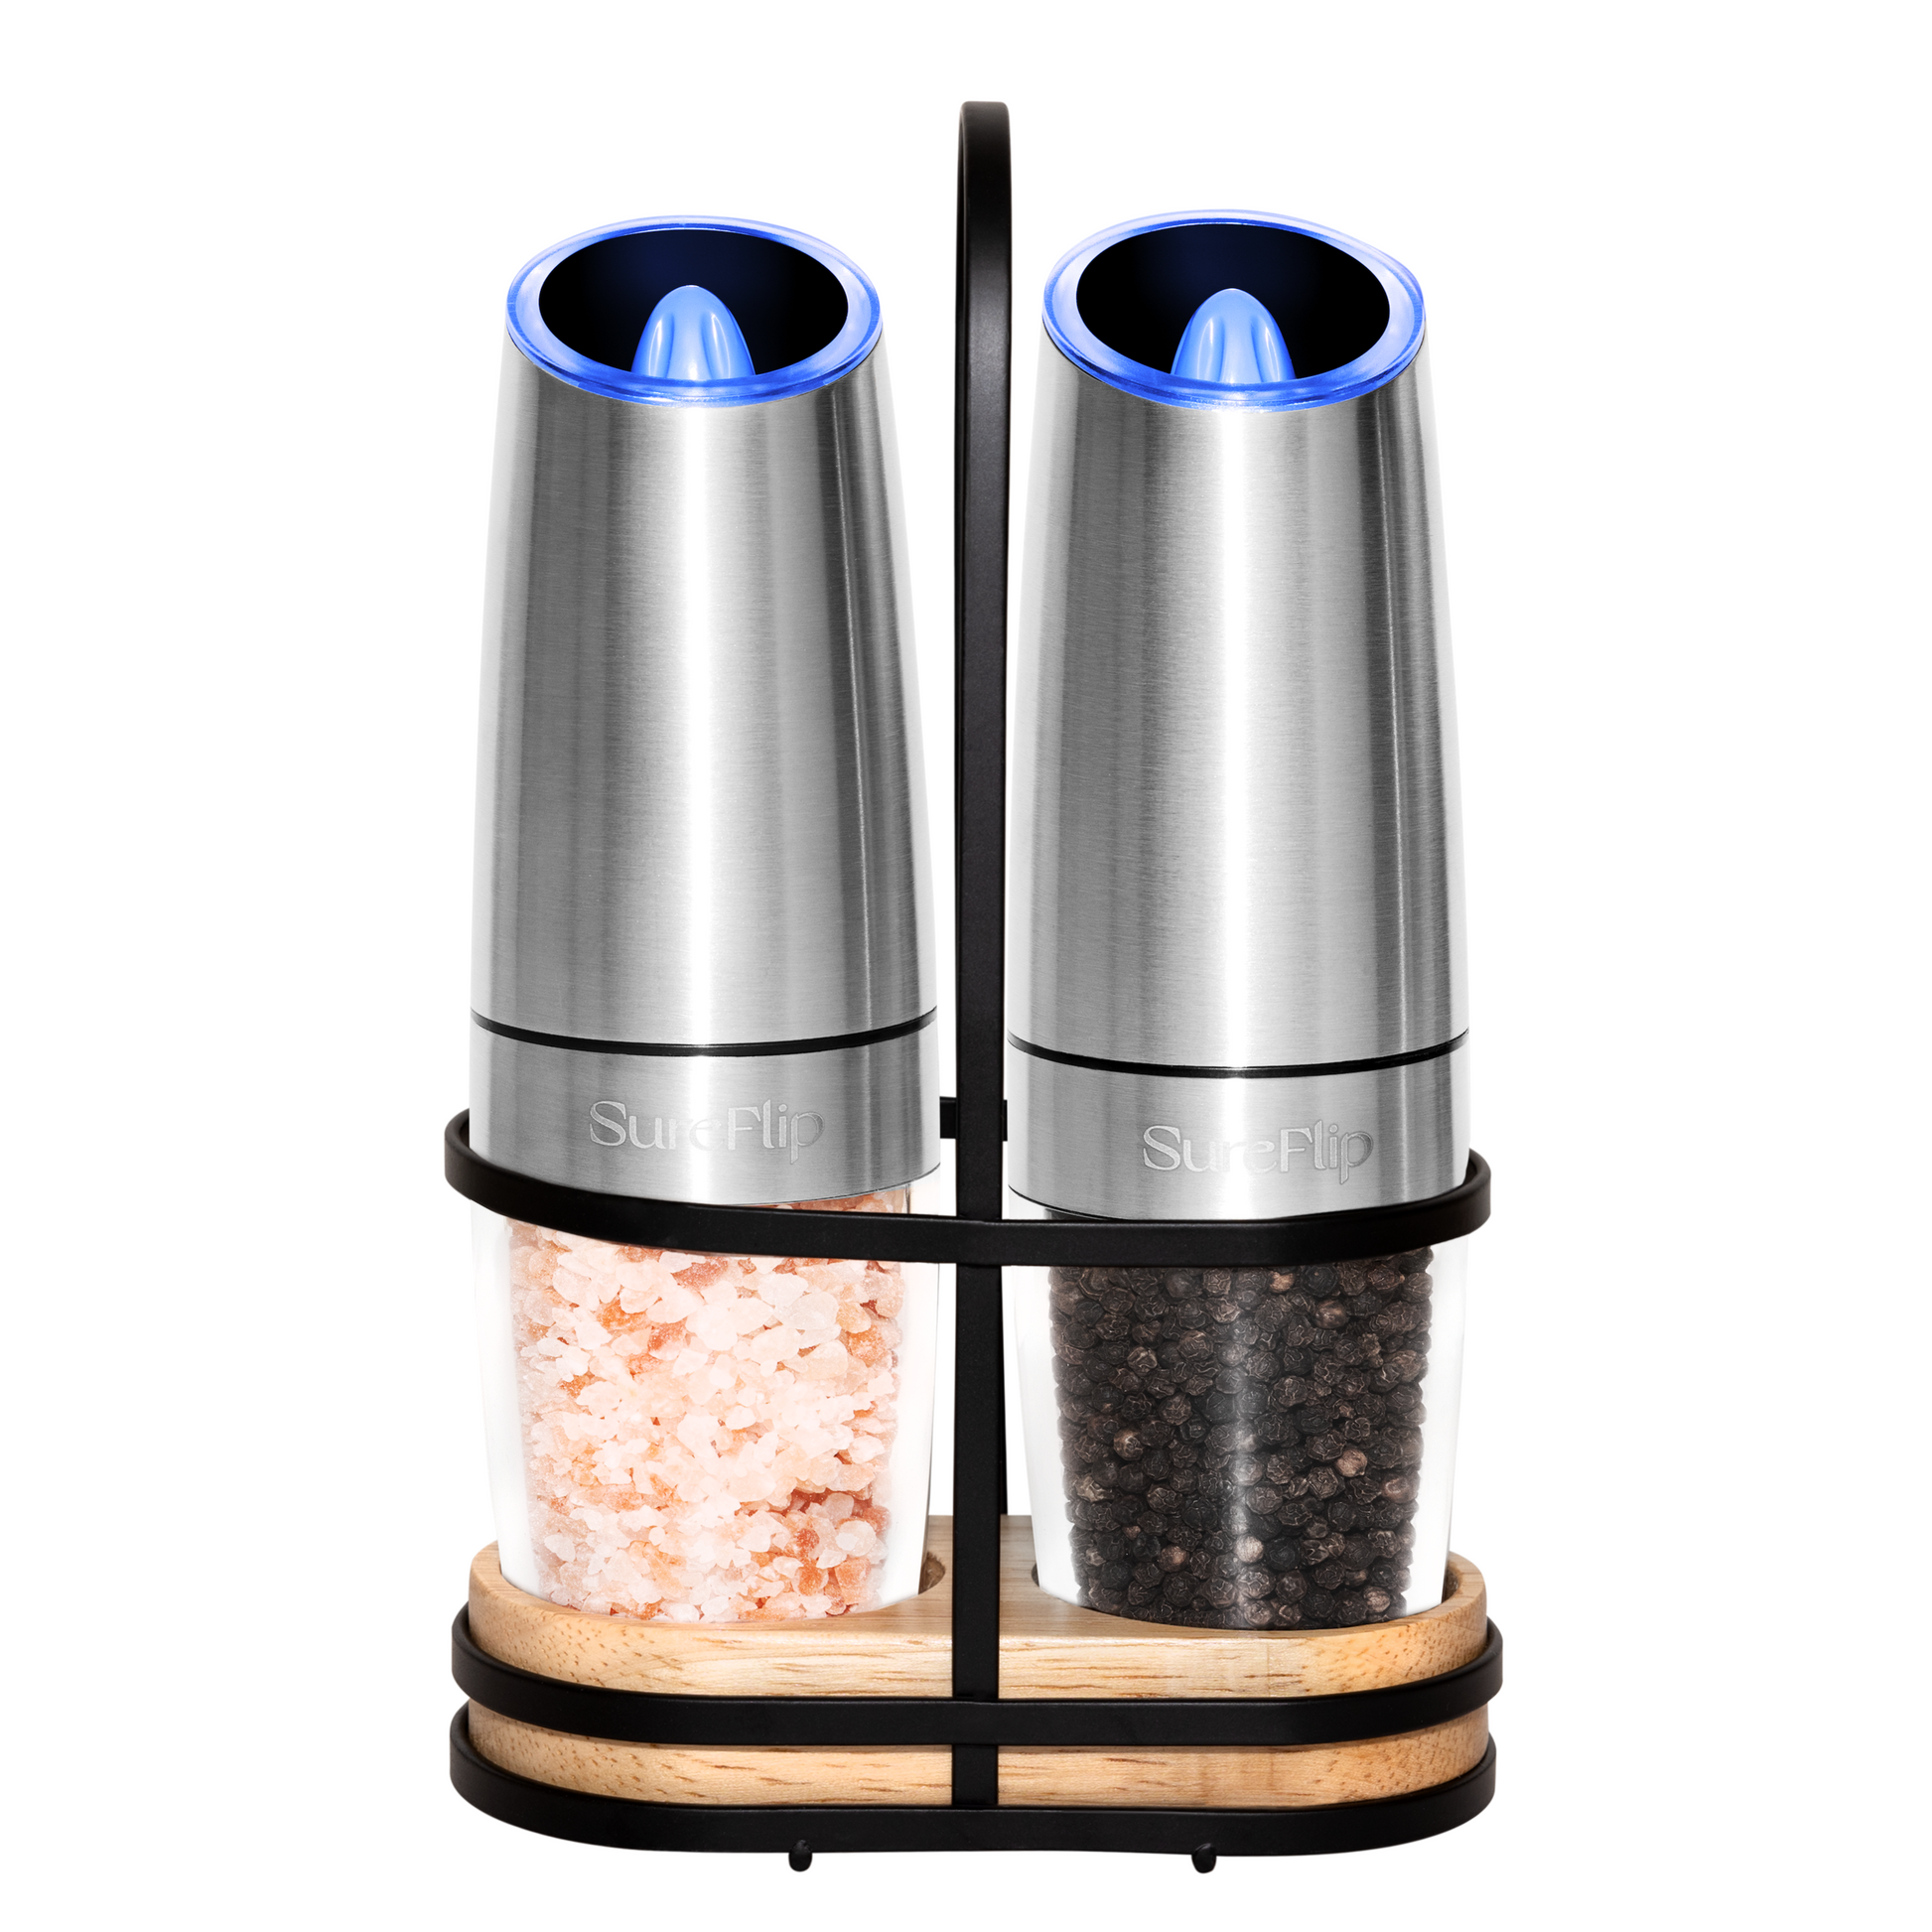 OPUX Battery-Operated Salt and Pepper Grinder Set with LED Light